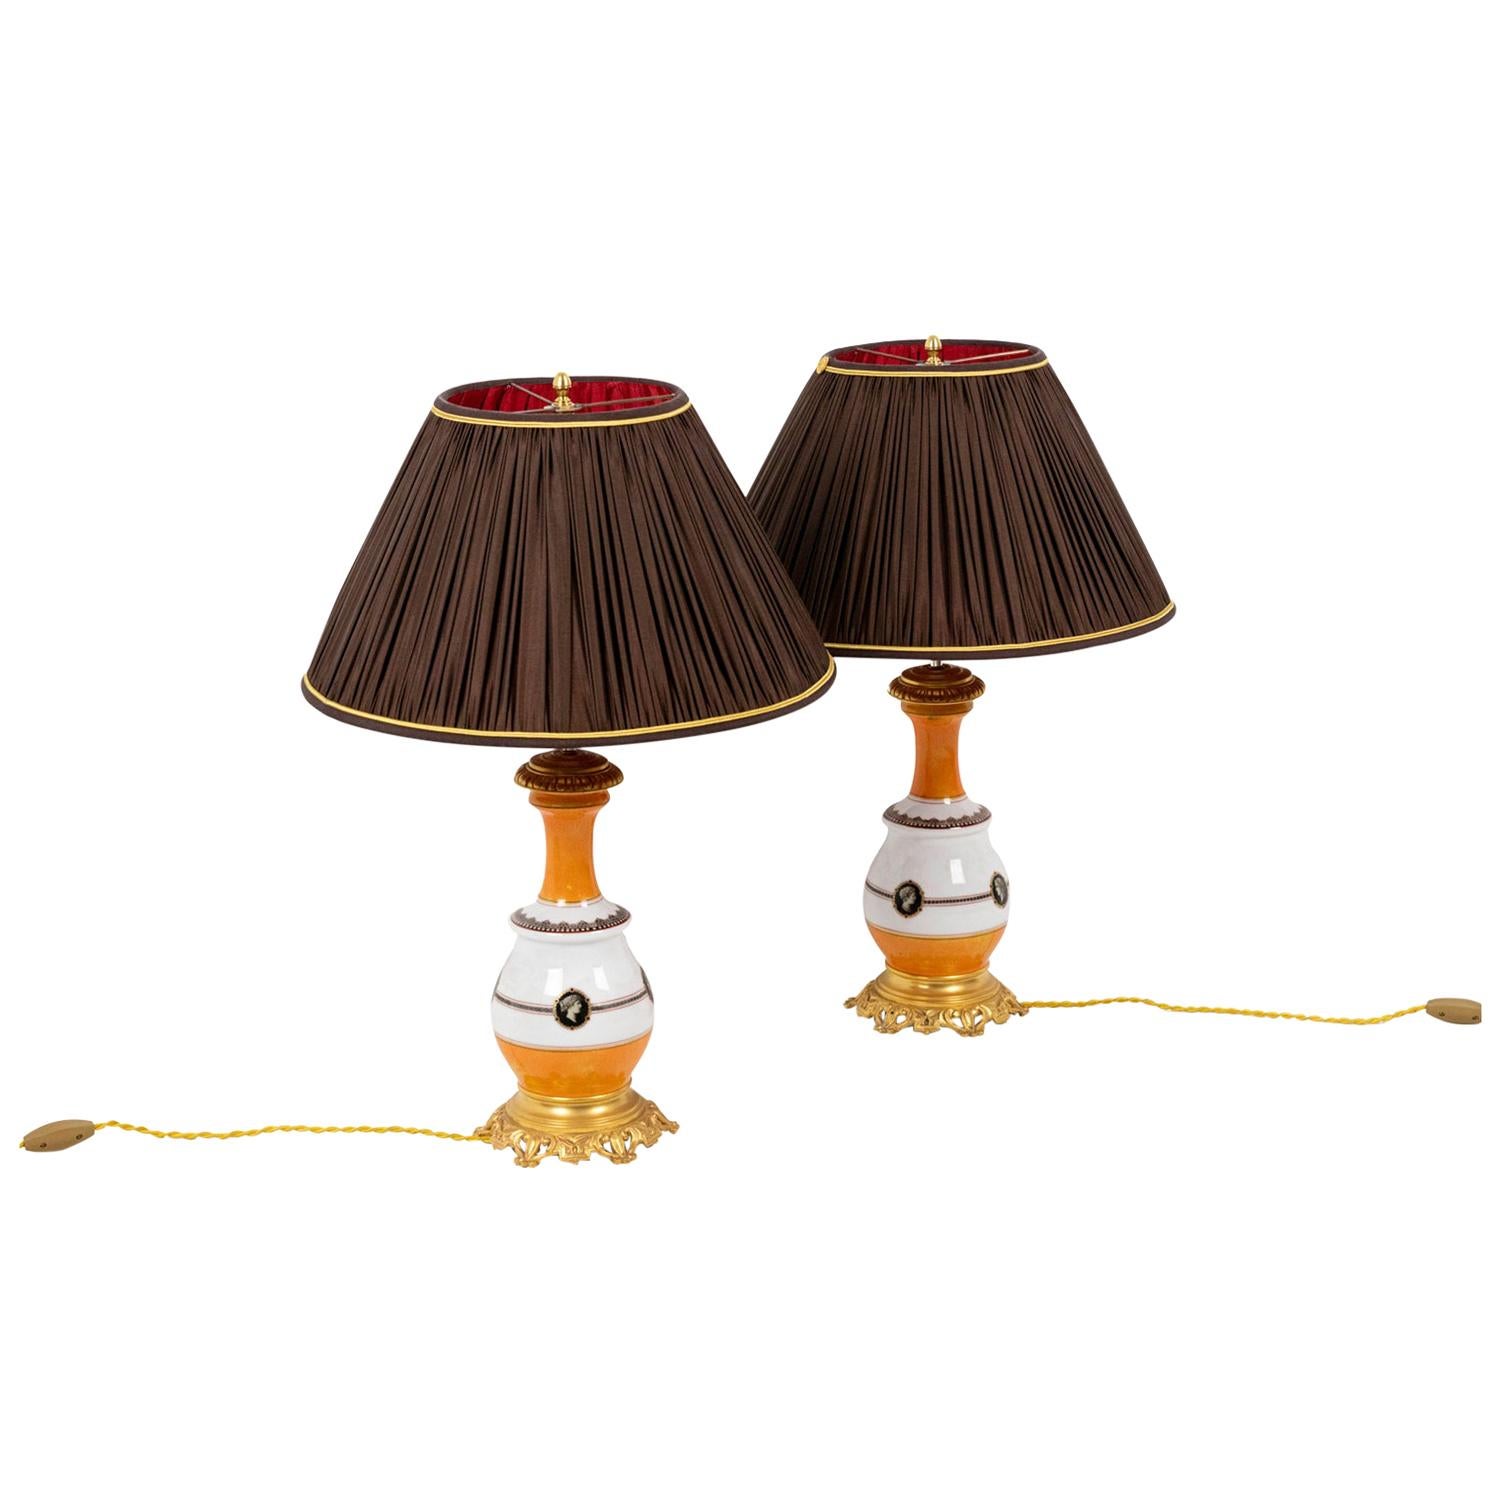 Pair of Lamps in Orange and White Porcelain, circa 1880